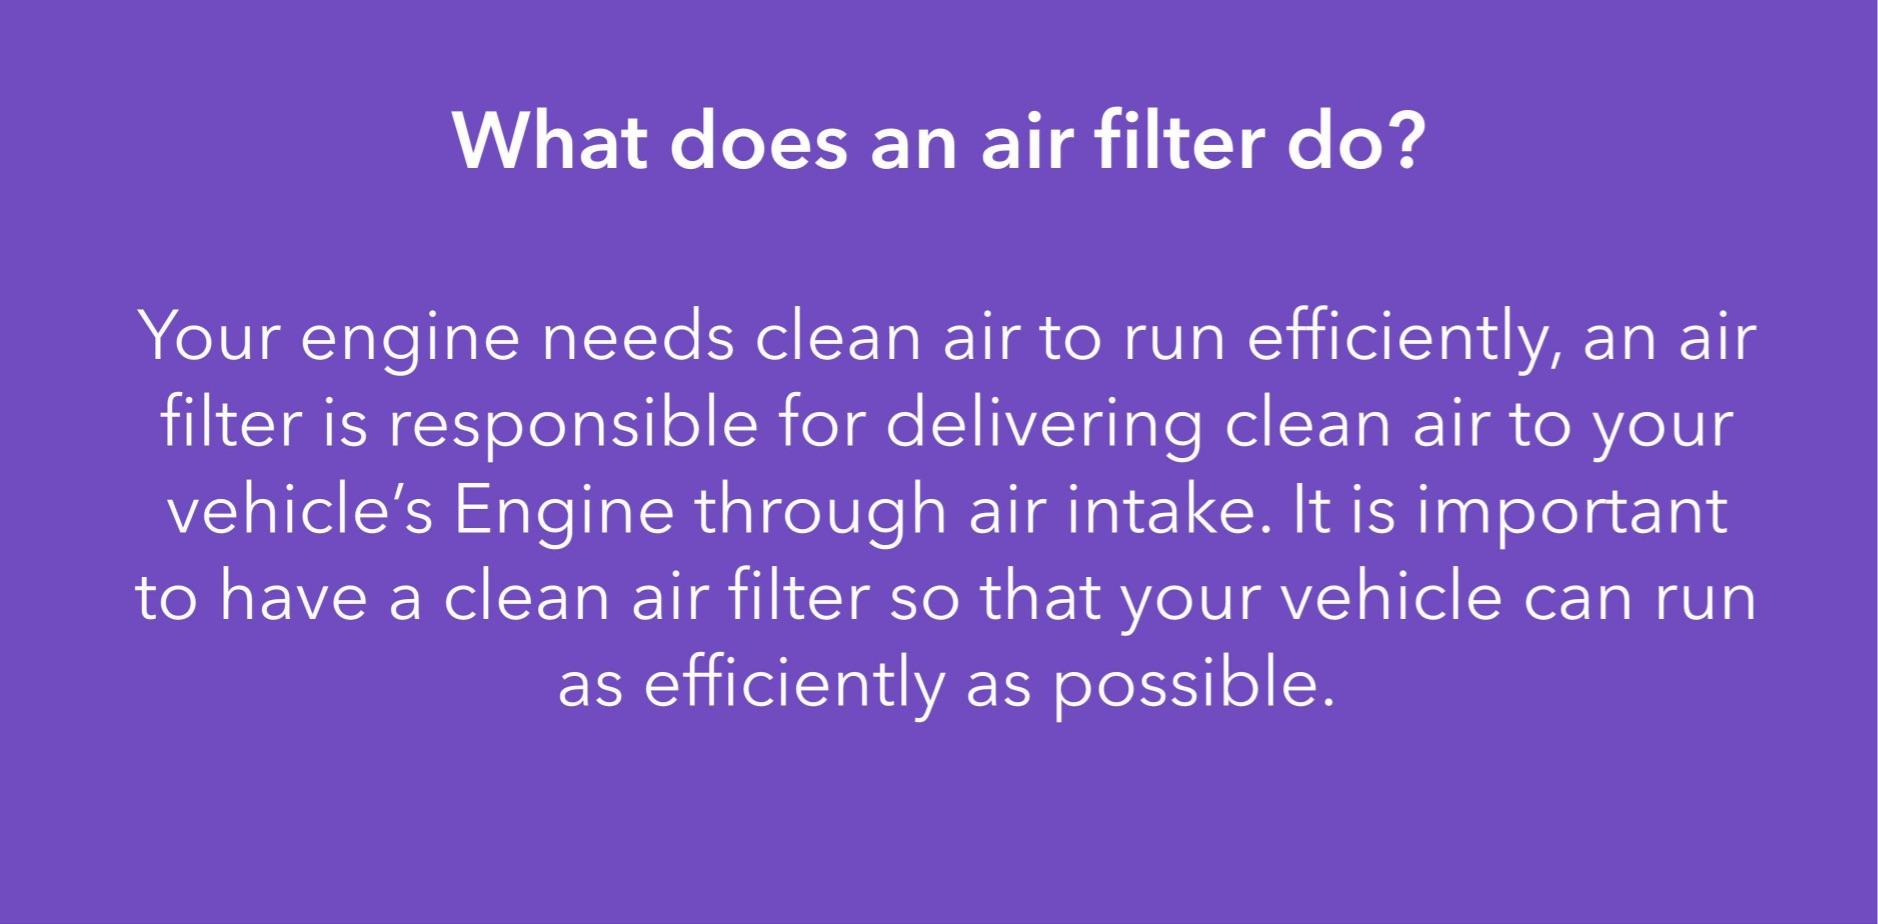 Your engine needs clean air to run efficiently, an air filter is responsible for delivering clean air to your vehicle’s Engine through air intake. It is important to have a clean air filter so that your vehicle can run as efficiently as possible.